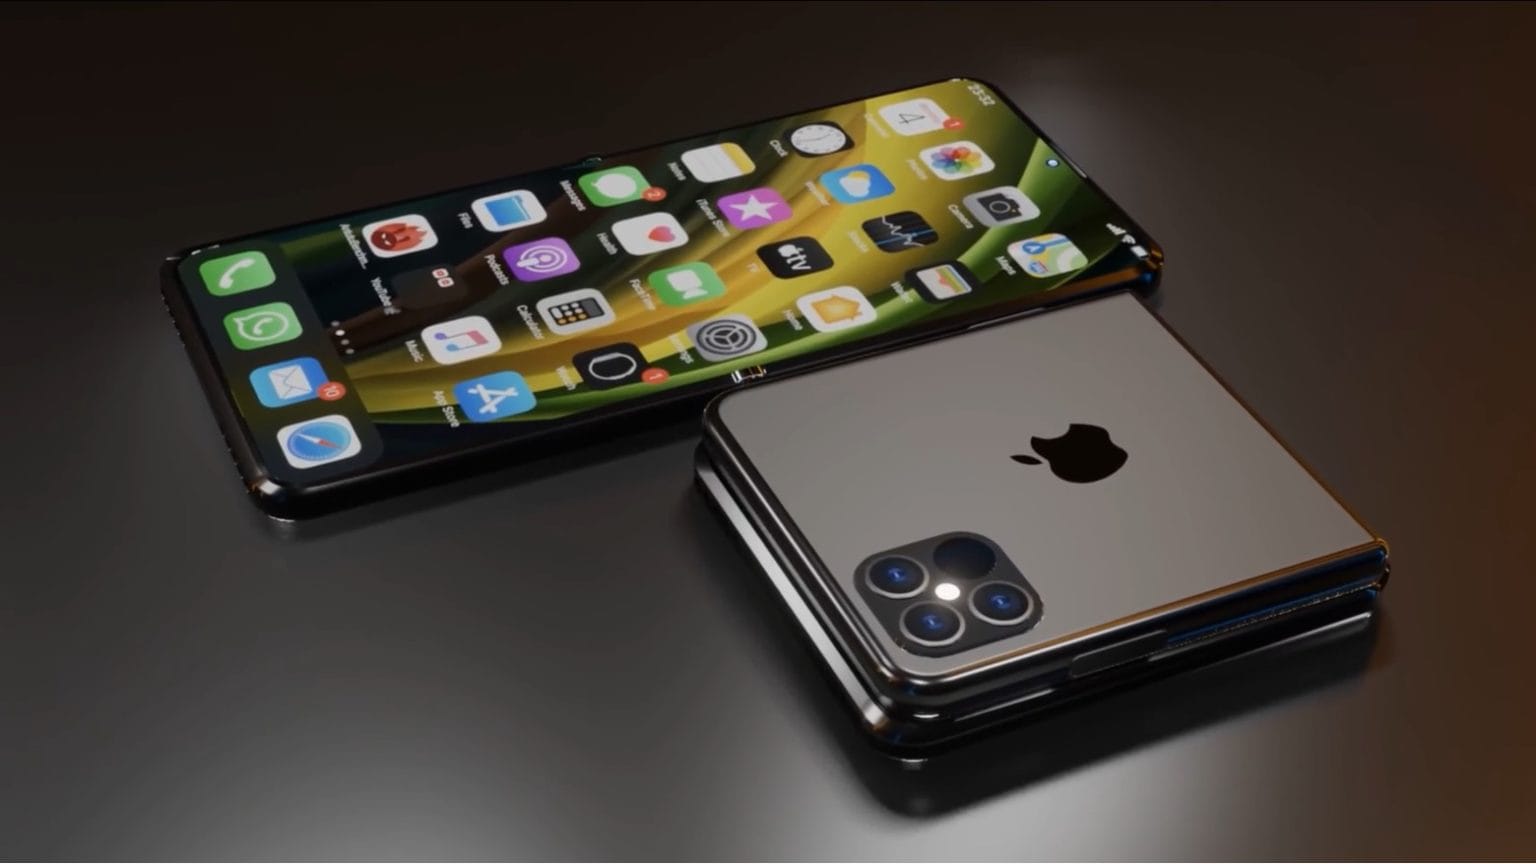 The foldable iPhone 12 Flip concept could someday be a reality.